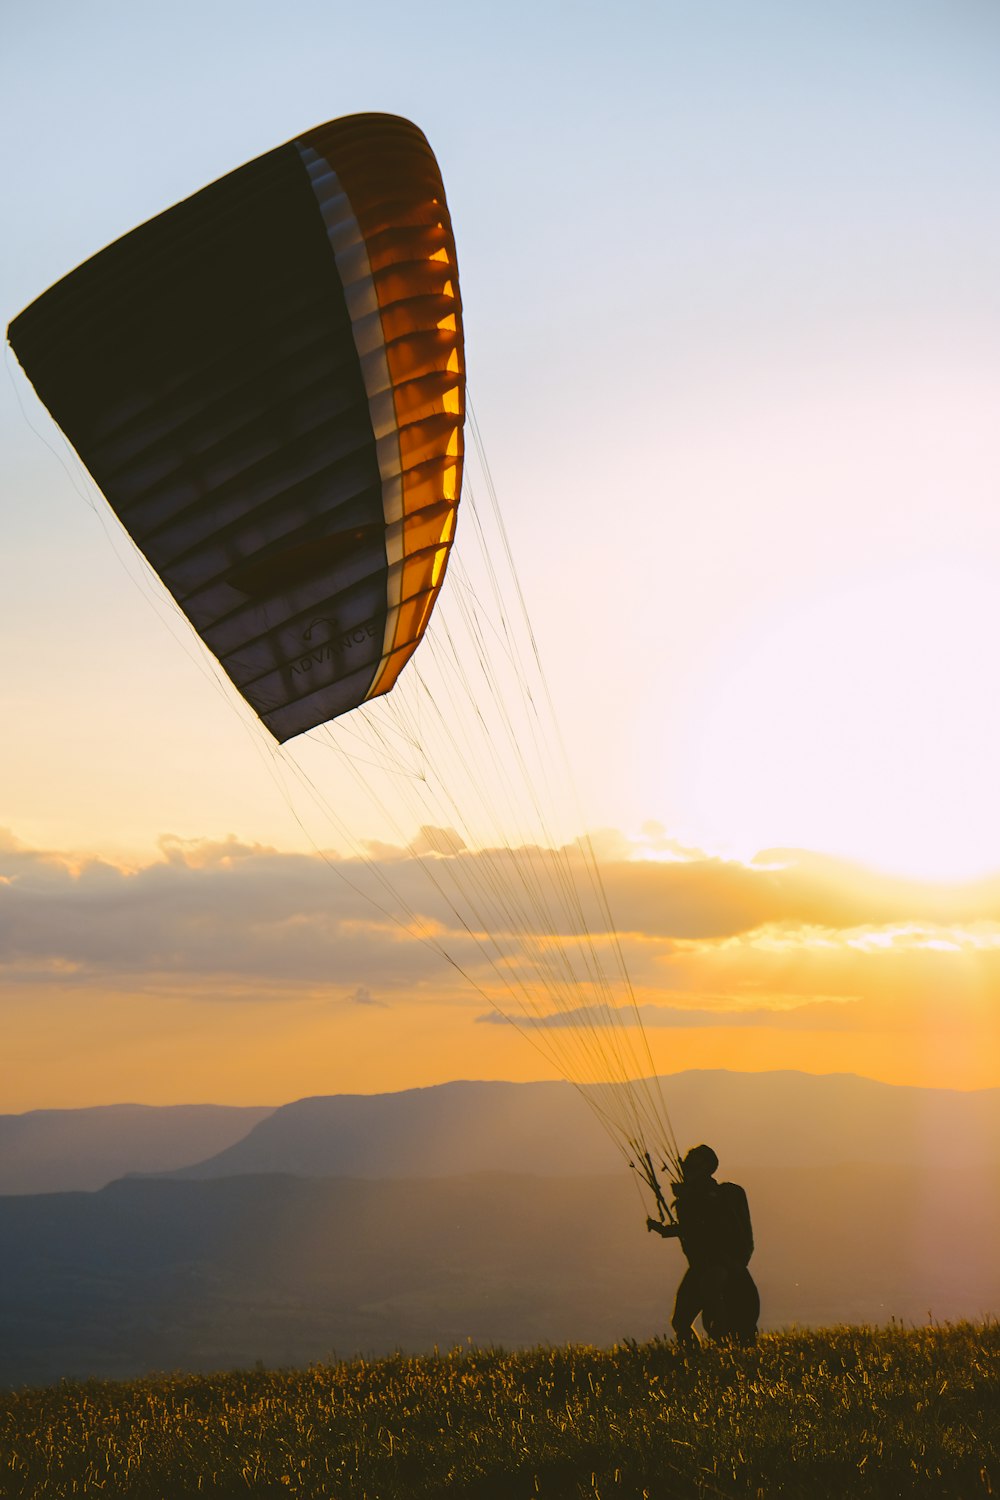 silhouette of person on parachute during sunset